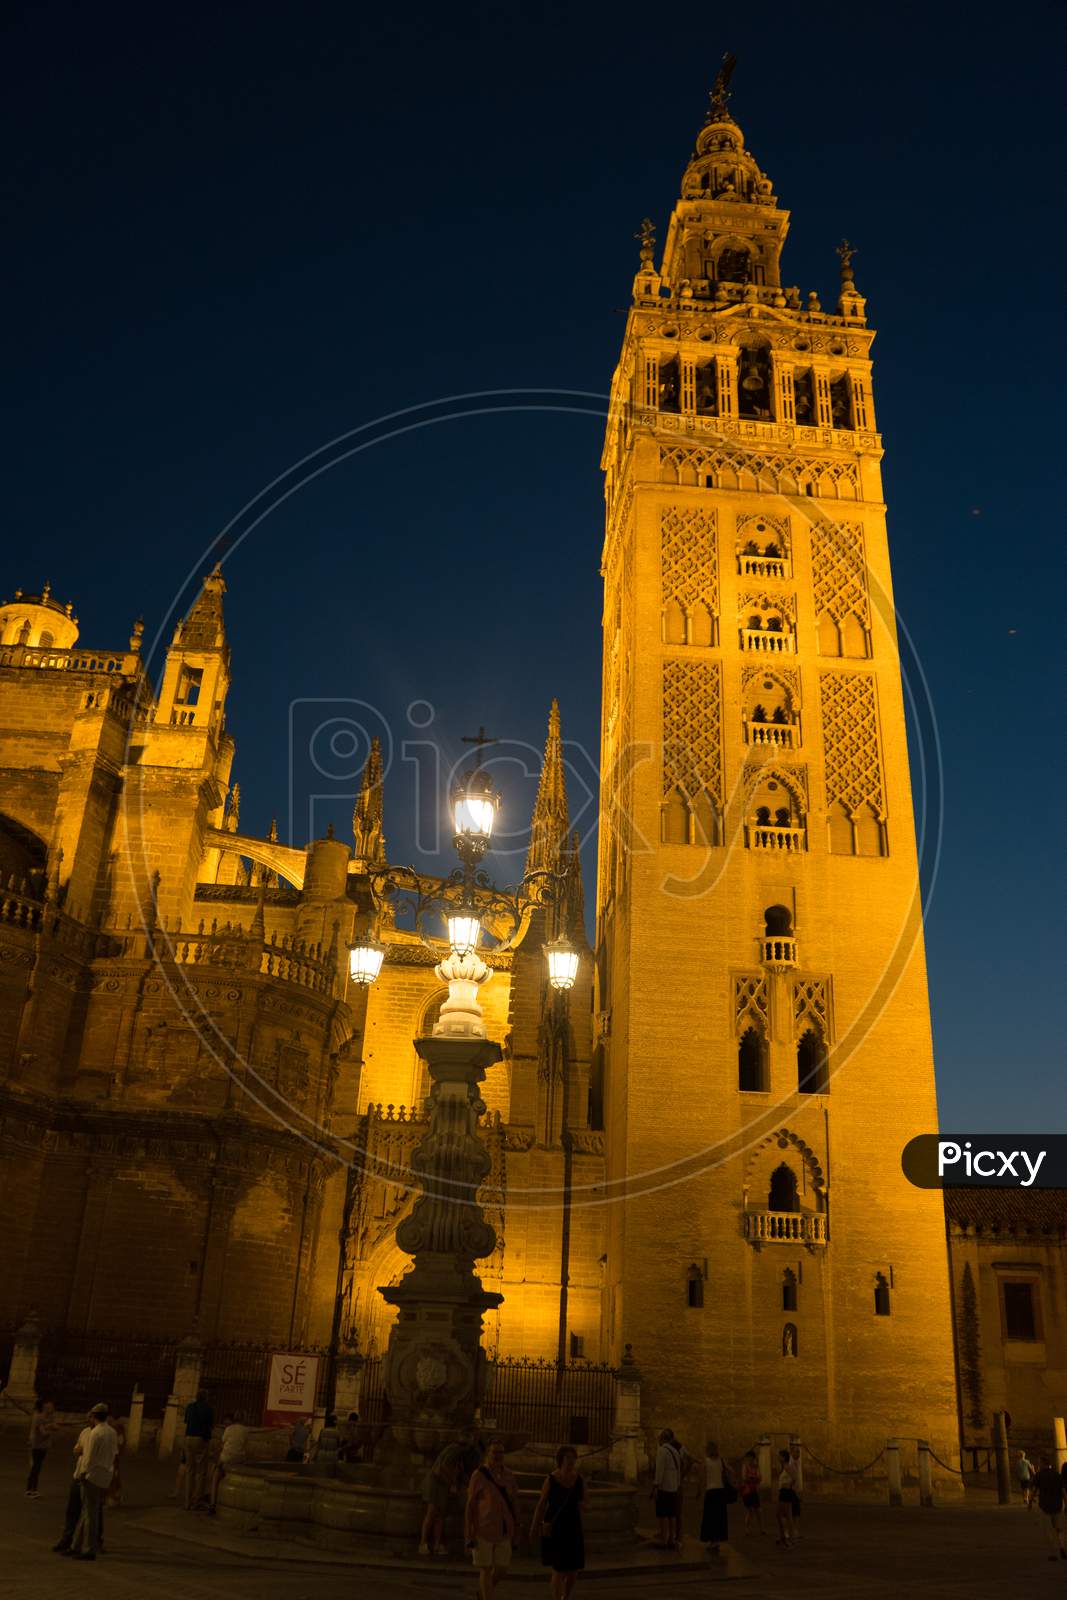 The Giralda Bell Tower Lit Up At Night In Seville, Spain, Europe